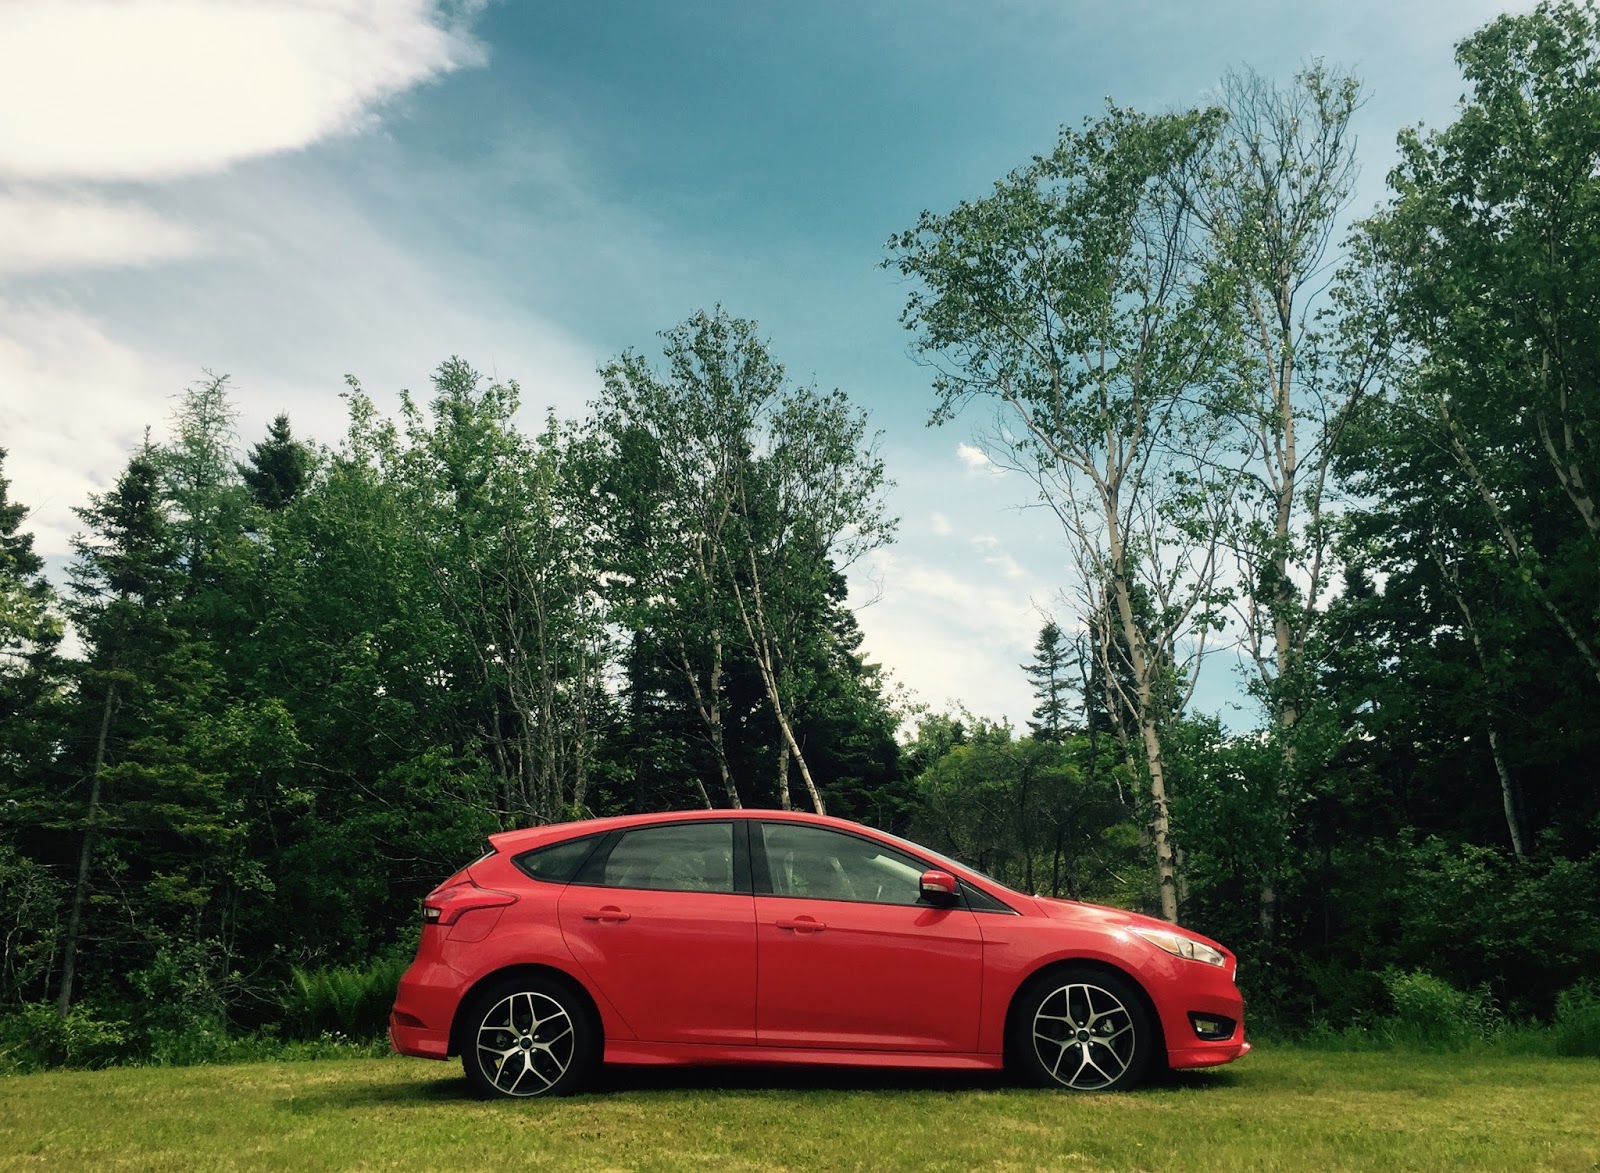 2015 Ford Focus SE Hatchback Review - Charming Chassis Continues To ...